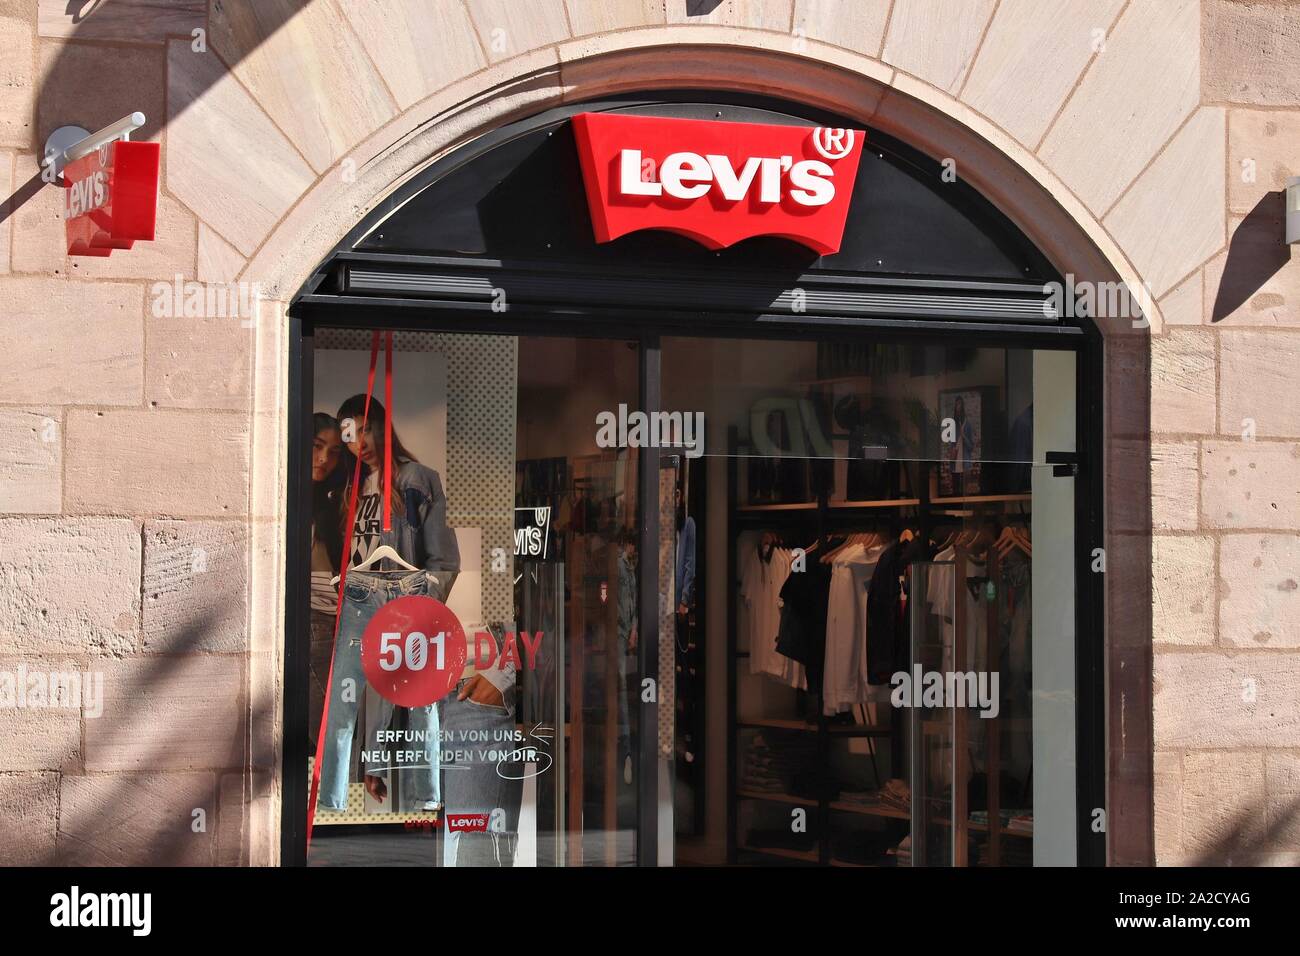 NUREMBERG, GERMANY - MAY 7, 2018: Levi's fashion store at a shopping street in Nuremberg, Germany. Stock Photo